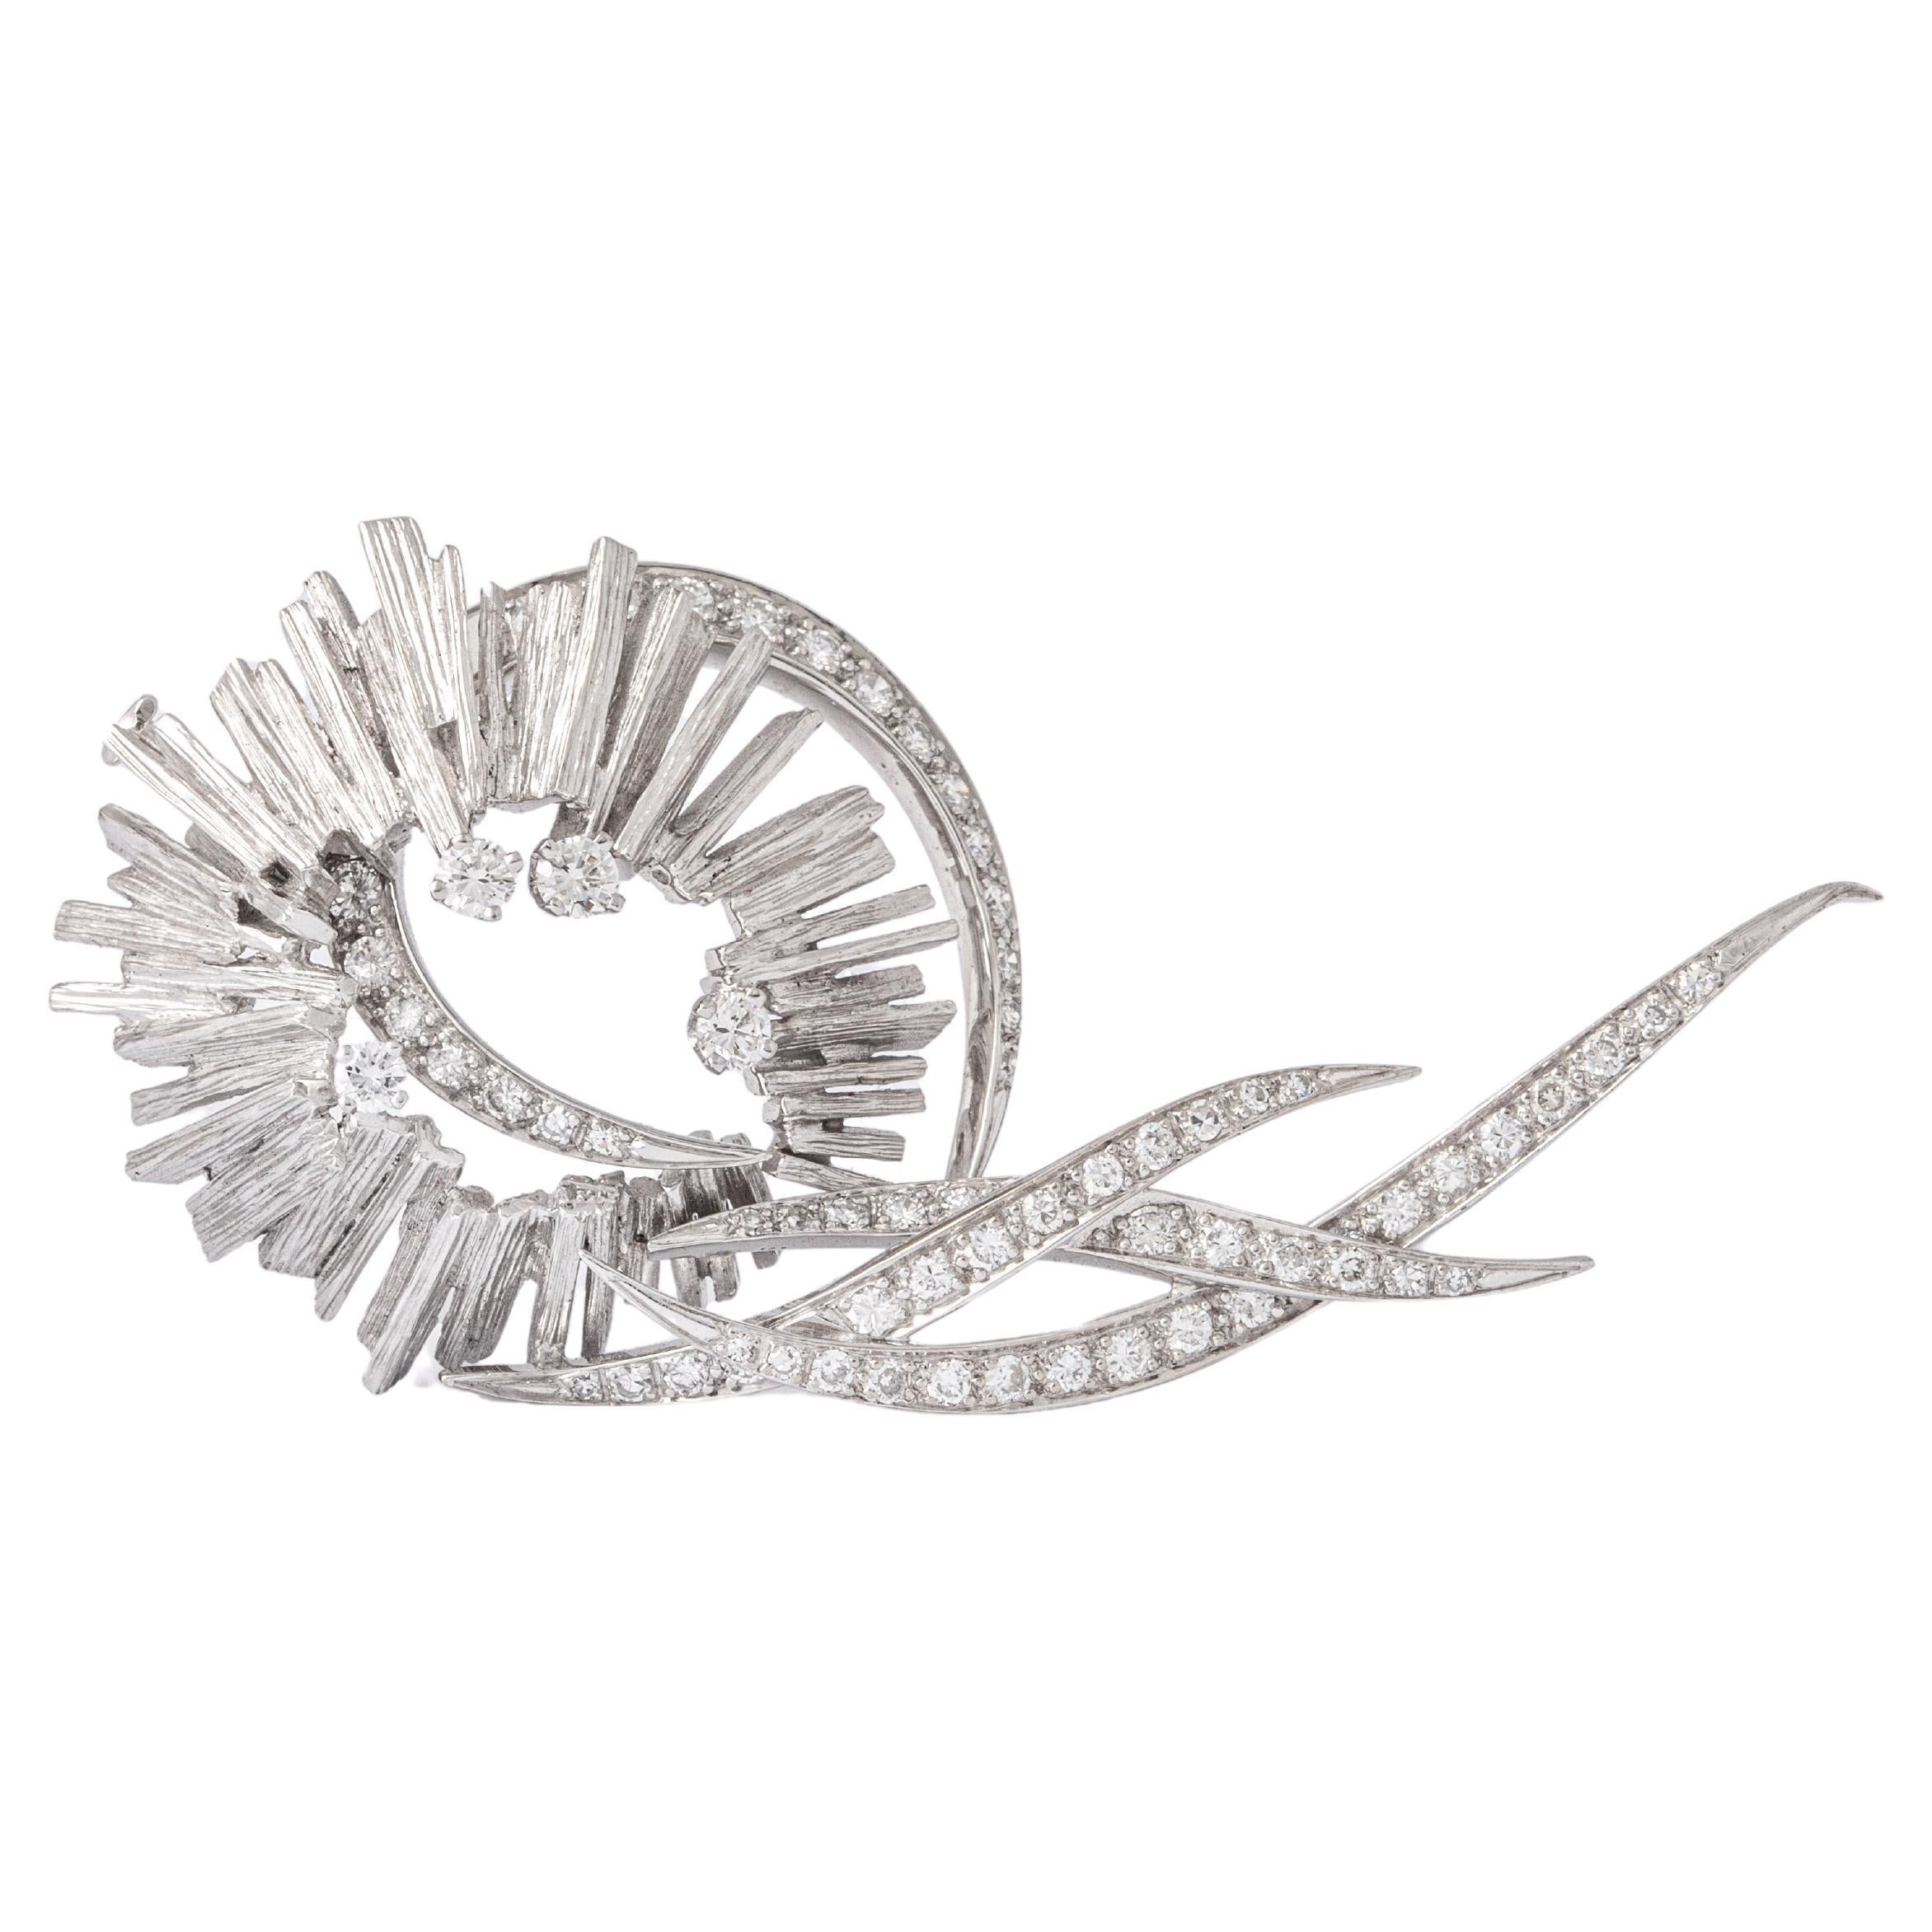 Diamond and white gold 18K Brooch stylized design.
66 diamonds. Total approximately 1.39 carats.
Circa 1960.
Total length: 6.00 centimeters.
Width: 0.10 centimeters up to 3.20 centimeters.

Total weight: 21.09 grams.